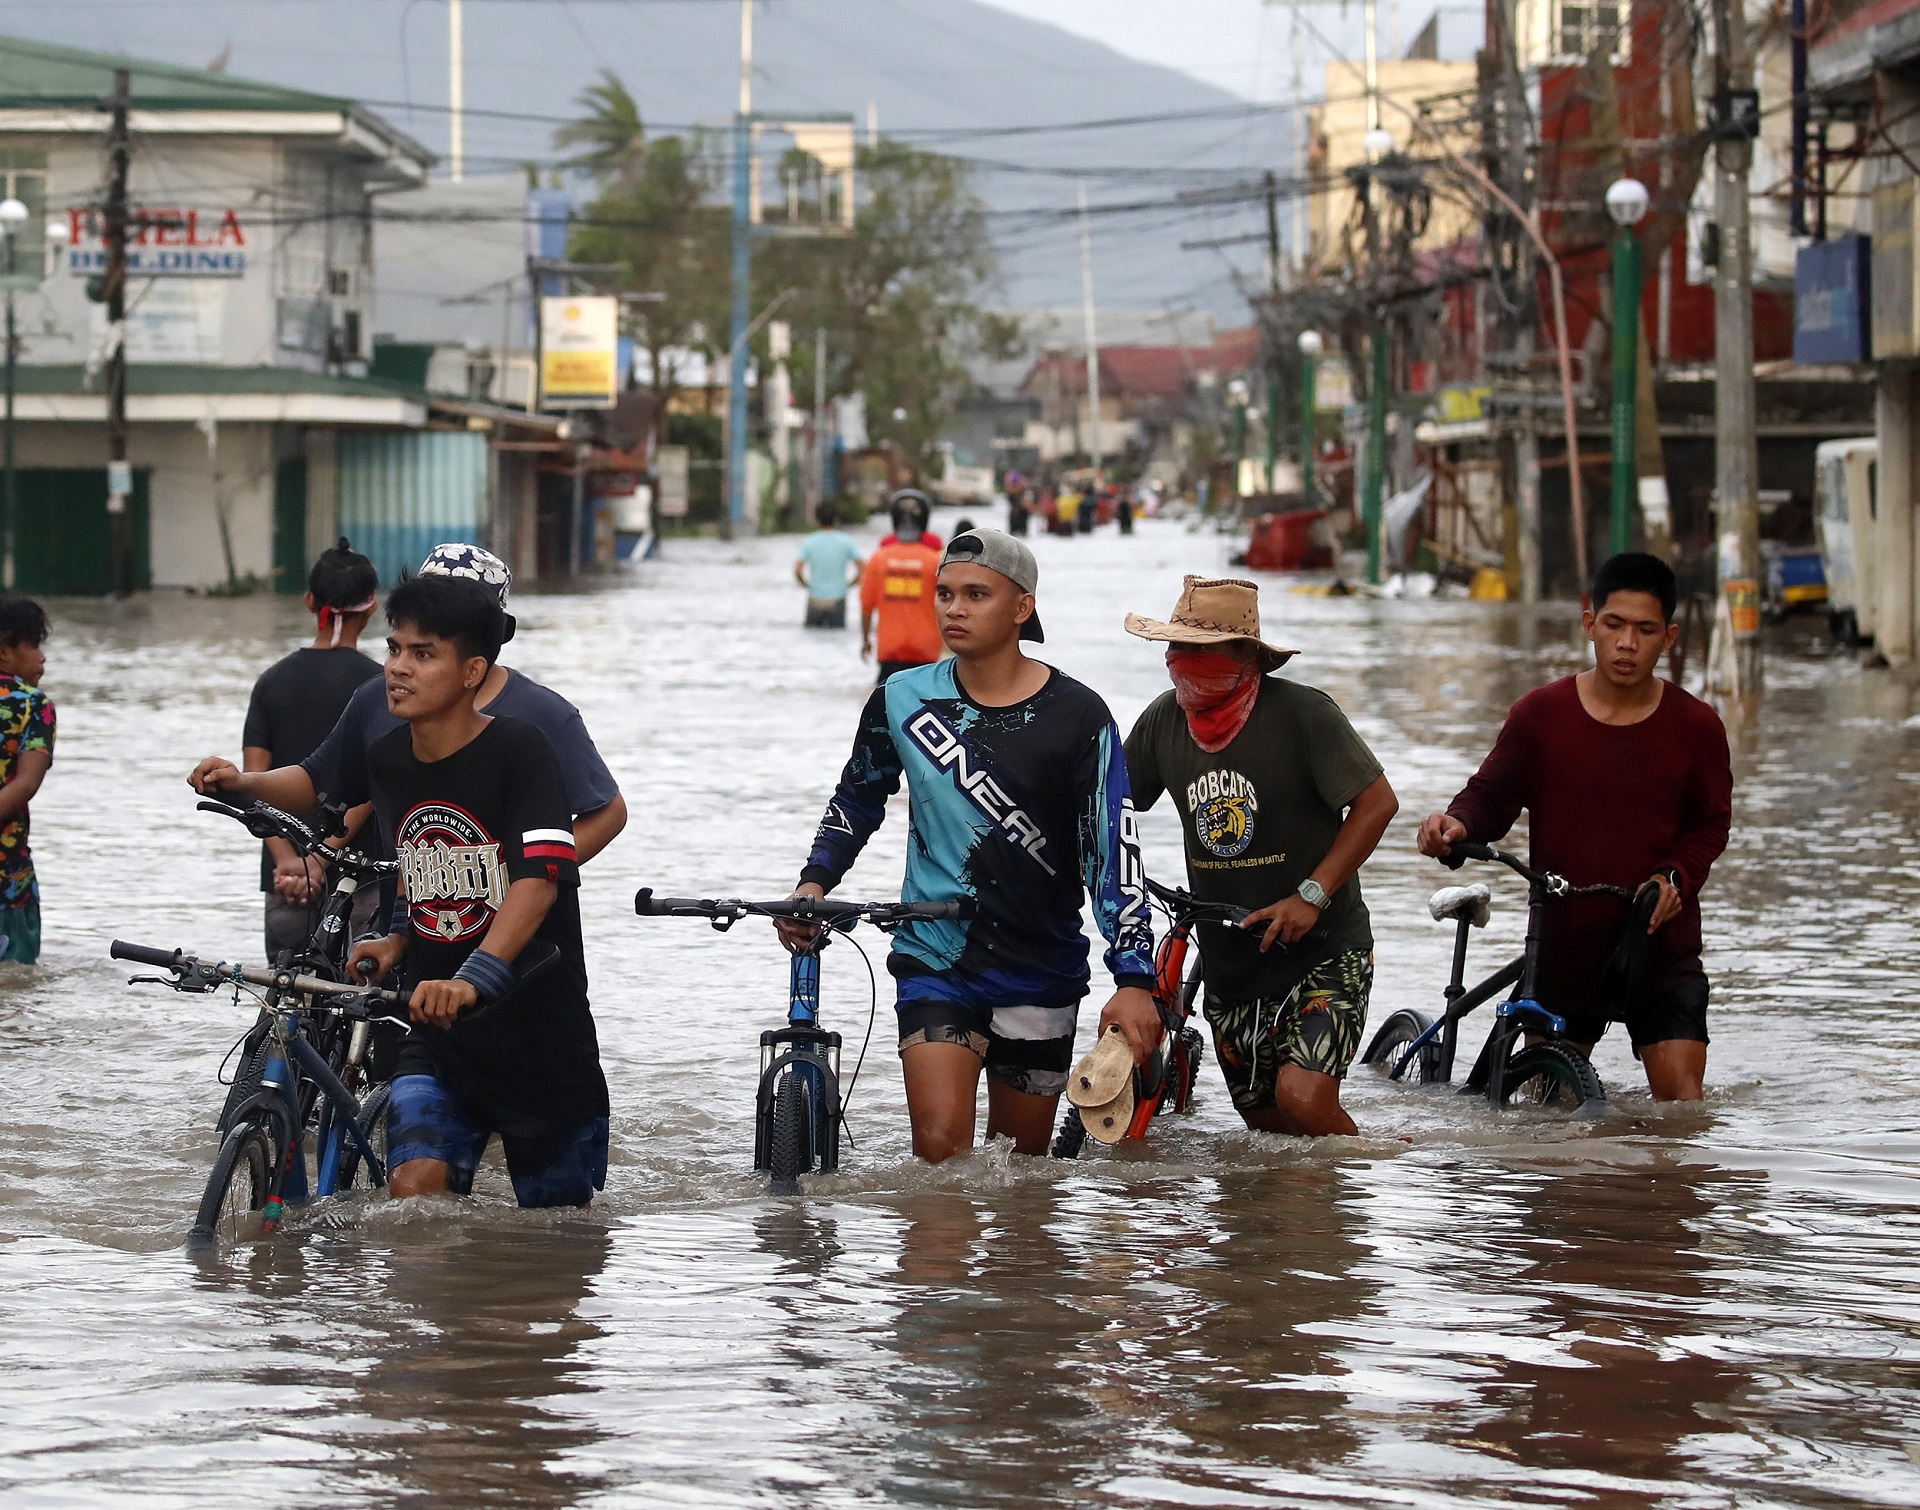 epa08790397 Filipino villagers wade along a flooded road in the typhoon-hit town of Nabua, Camarines Sur, Philippines, 01 November 2020. Super Typhoon Goni, with winds forecasted to reach over 240 kilometers per hour, made landfall on 01 November 2020, in the Philippine provinces of Albay, Camarines Sur and Quezon.  EPA/FRANCIS R. MALASIG